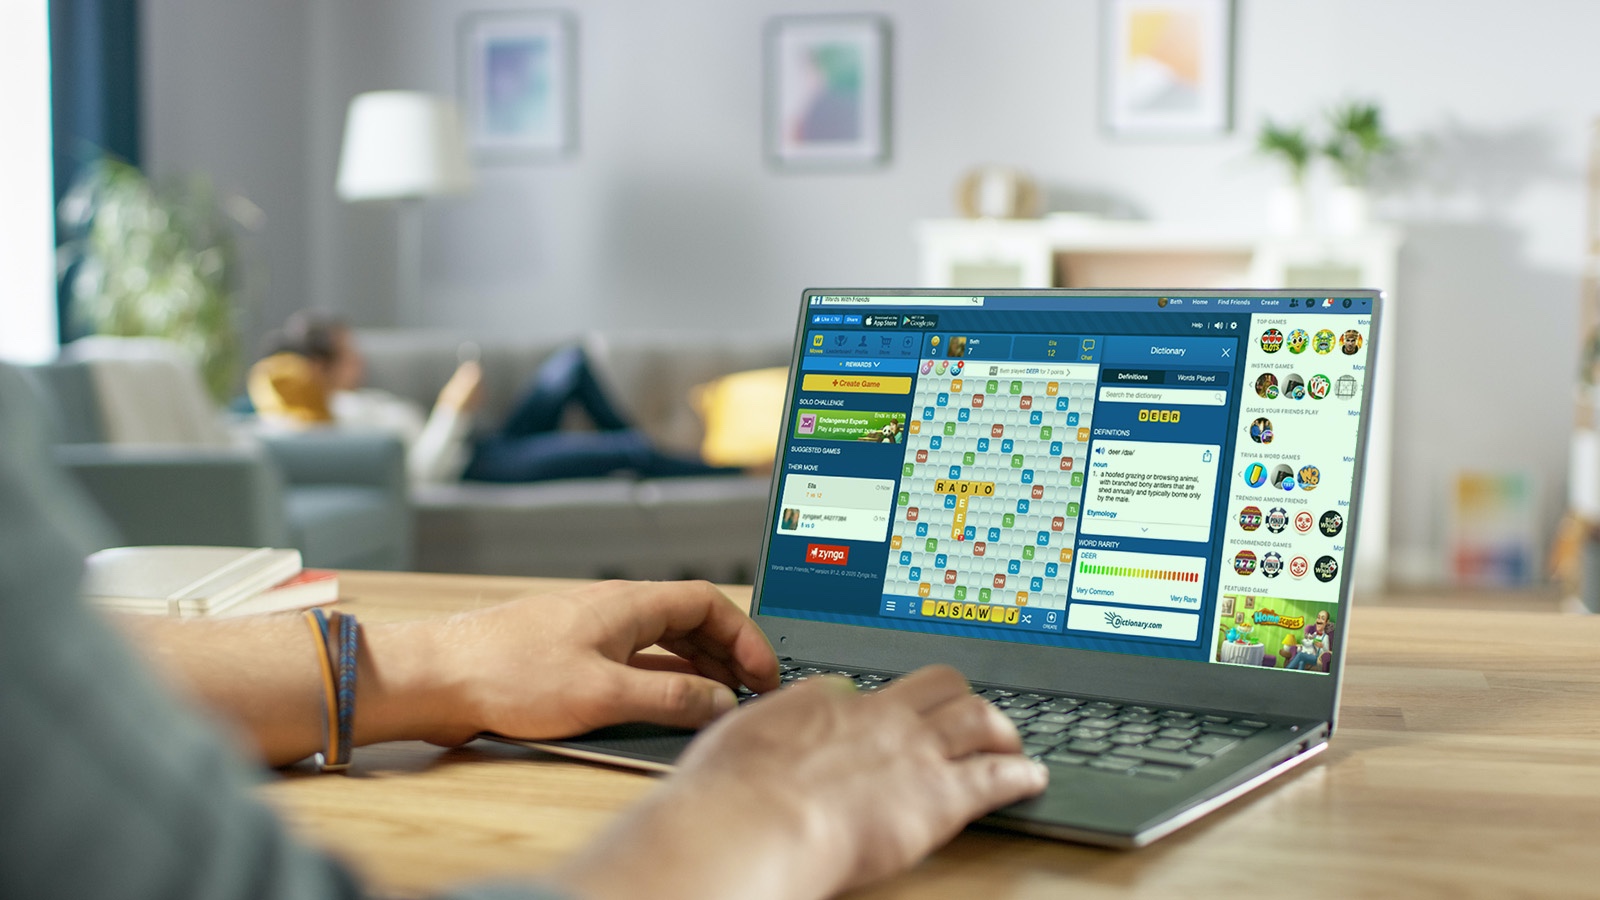 Playing Words With Friends on computer